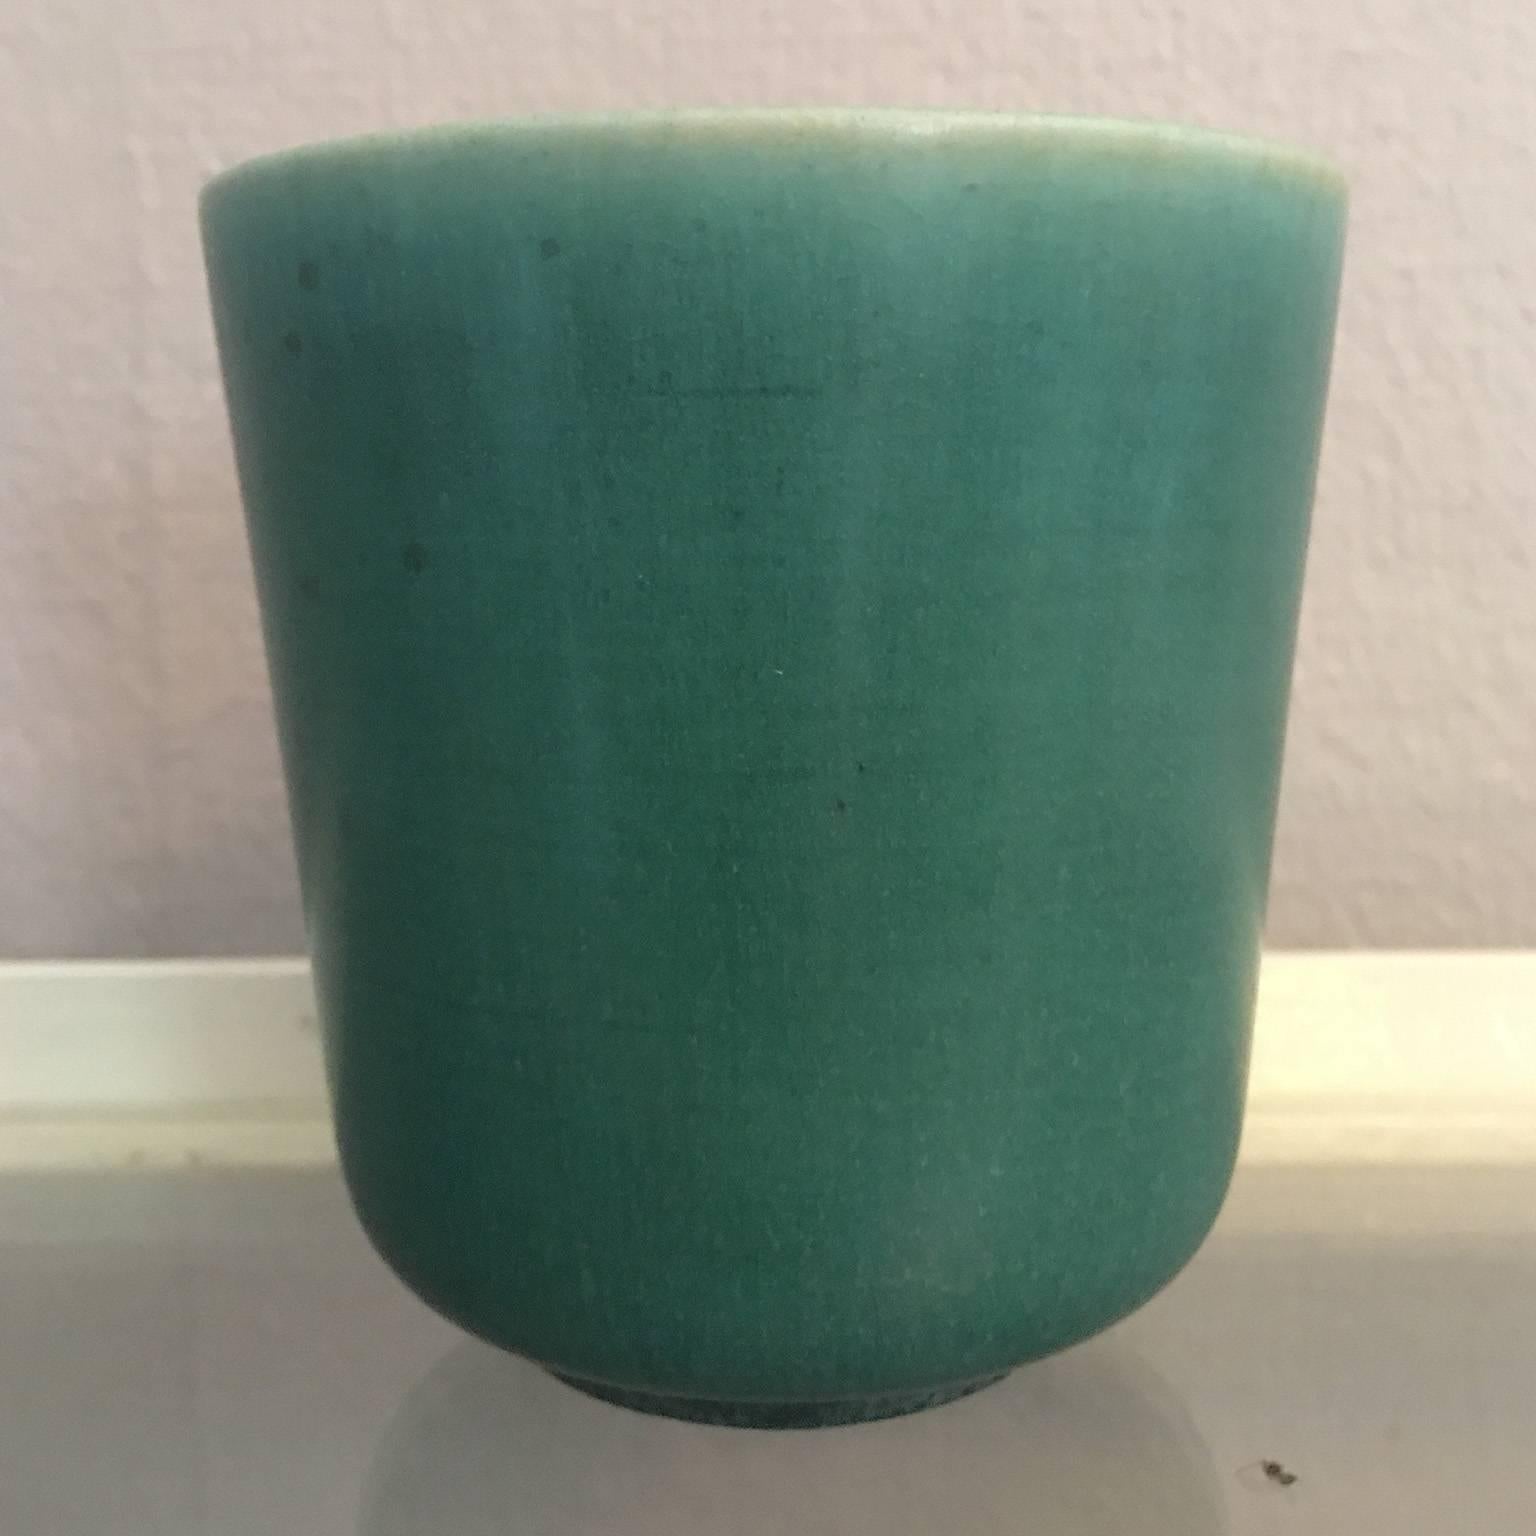 Green Saxbo vase in mint condition 
No chips or nags
Measures: H 9 cm 
Ø 9 cm.